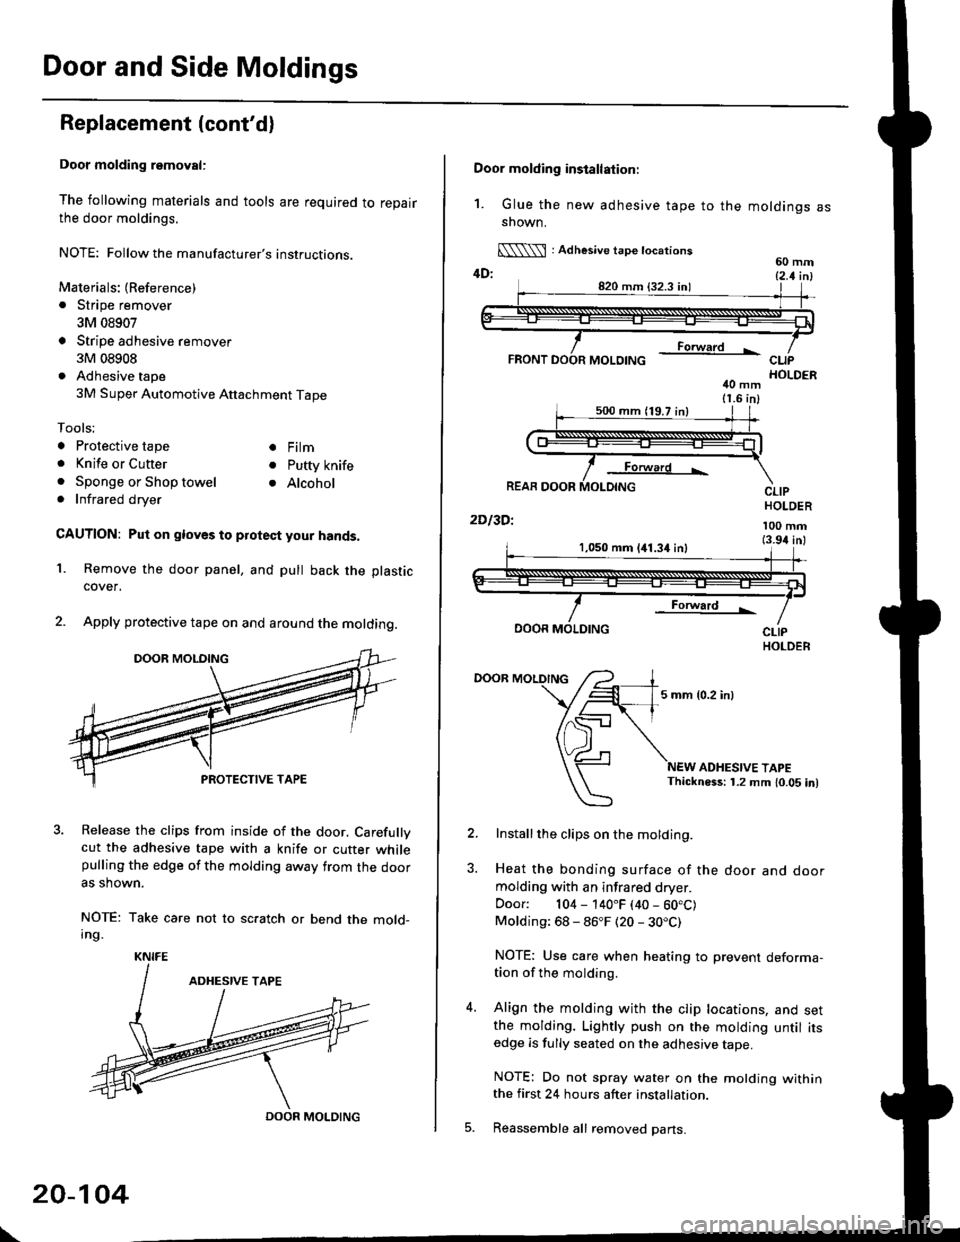 HONDA CIVIC 1999 6.G Workshop Manual Door and Side Moldings
Replacement (contdl
Door molding removal:
The following materials and tools are required to repairthe door moldings.
NOTE: Followthe manufacturers instructions.
Materials: (Re